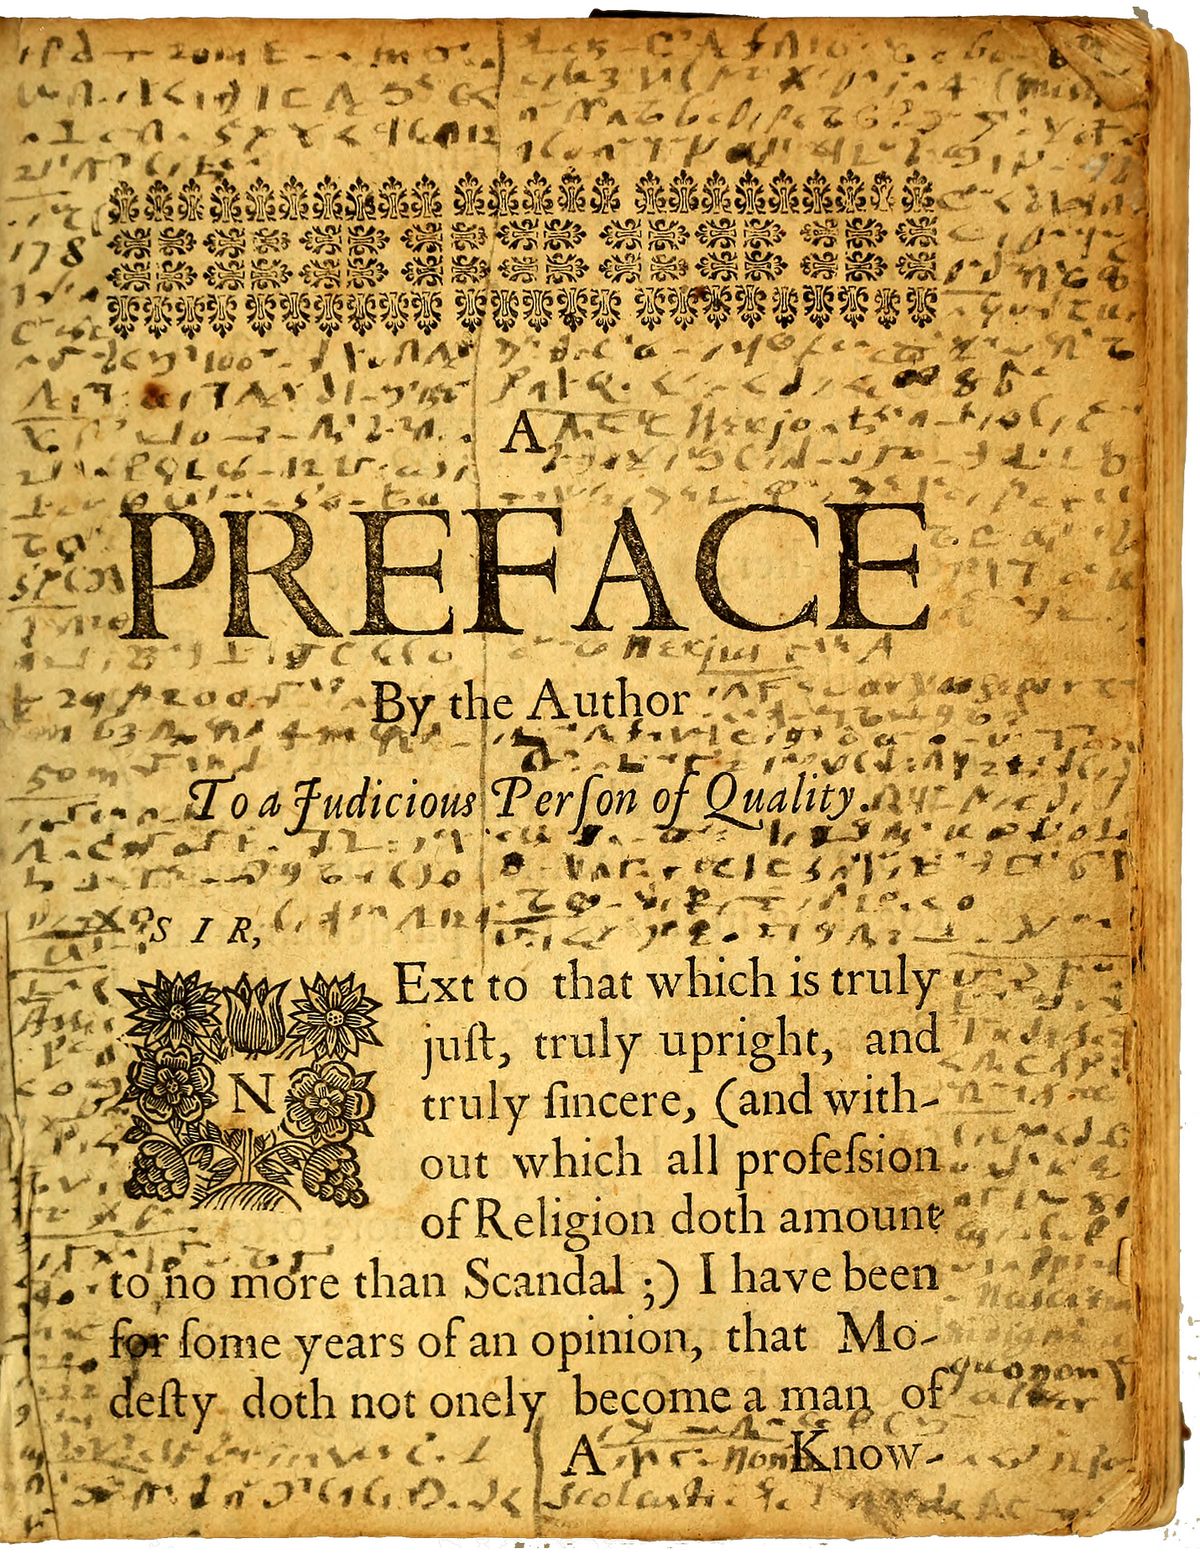 This image provided by Brown University shows the preface page of the "Mystery Book" from the John Carter Brown Library in Providence, R.I. Lucas Mason-Brown, a senior mathematics major at Brown University, helped crack a mysterious shorthand code developed and used by religious dissident Roger Williams in the 17th century. The handwritten code surrounds the printed text on the preface page. (Brown University)